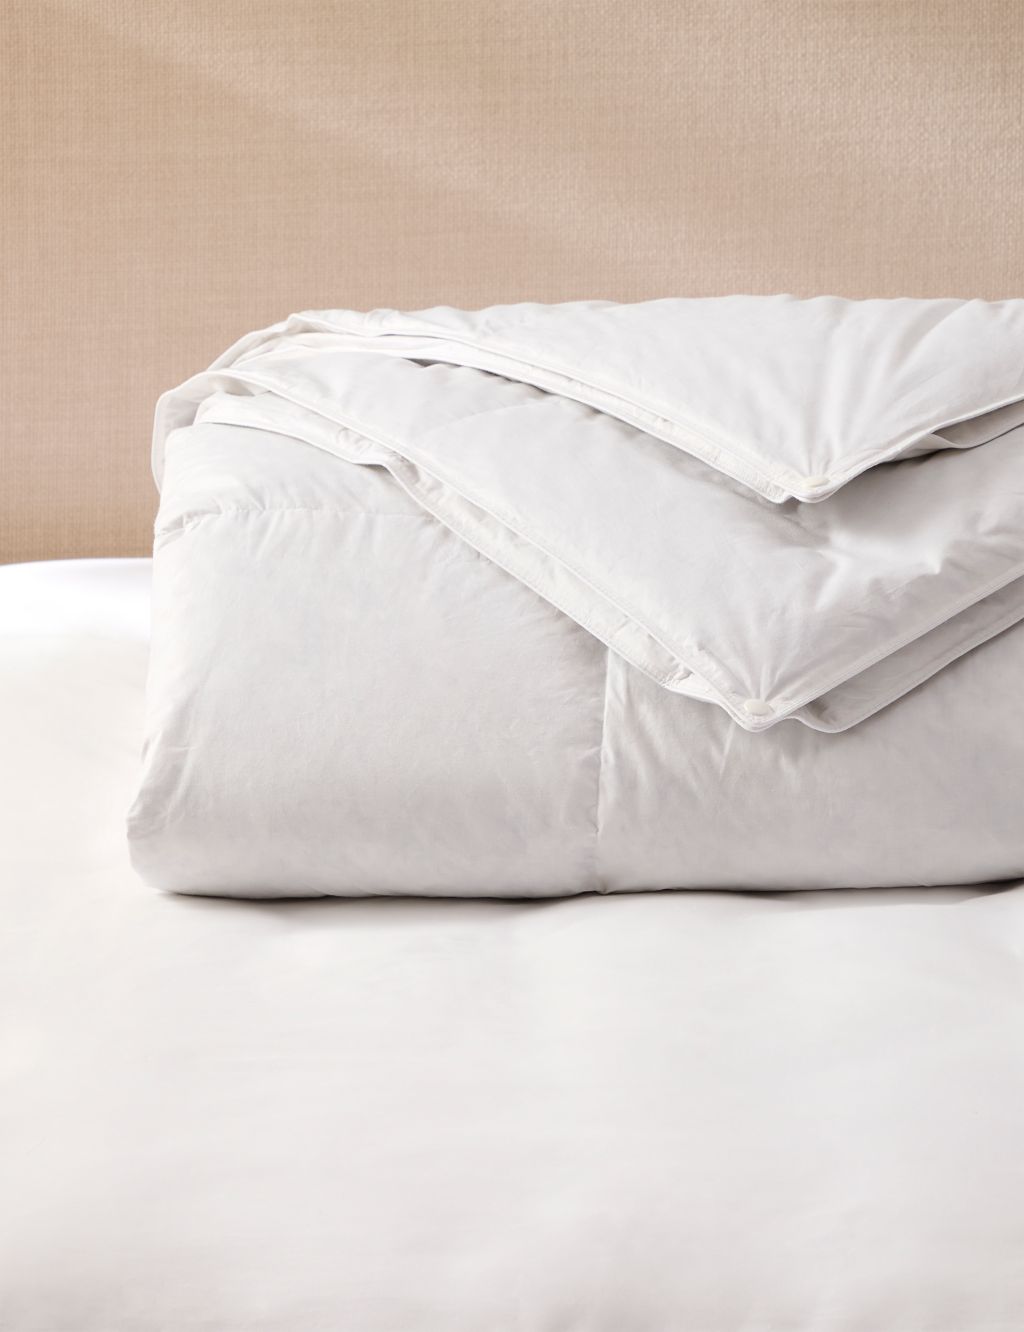 Goose Feather & Down 13.5 Tog All Season Duvet image 1